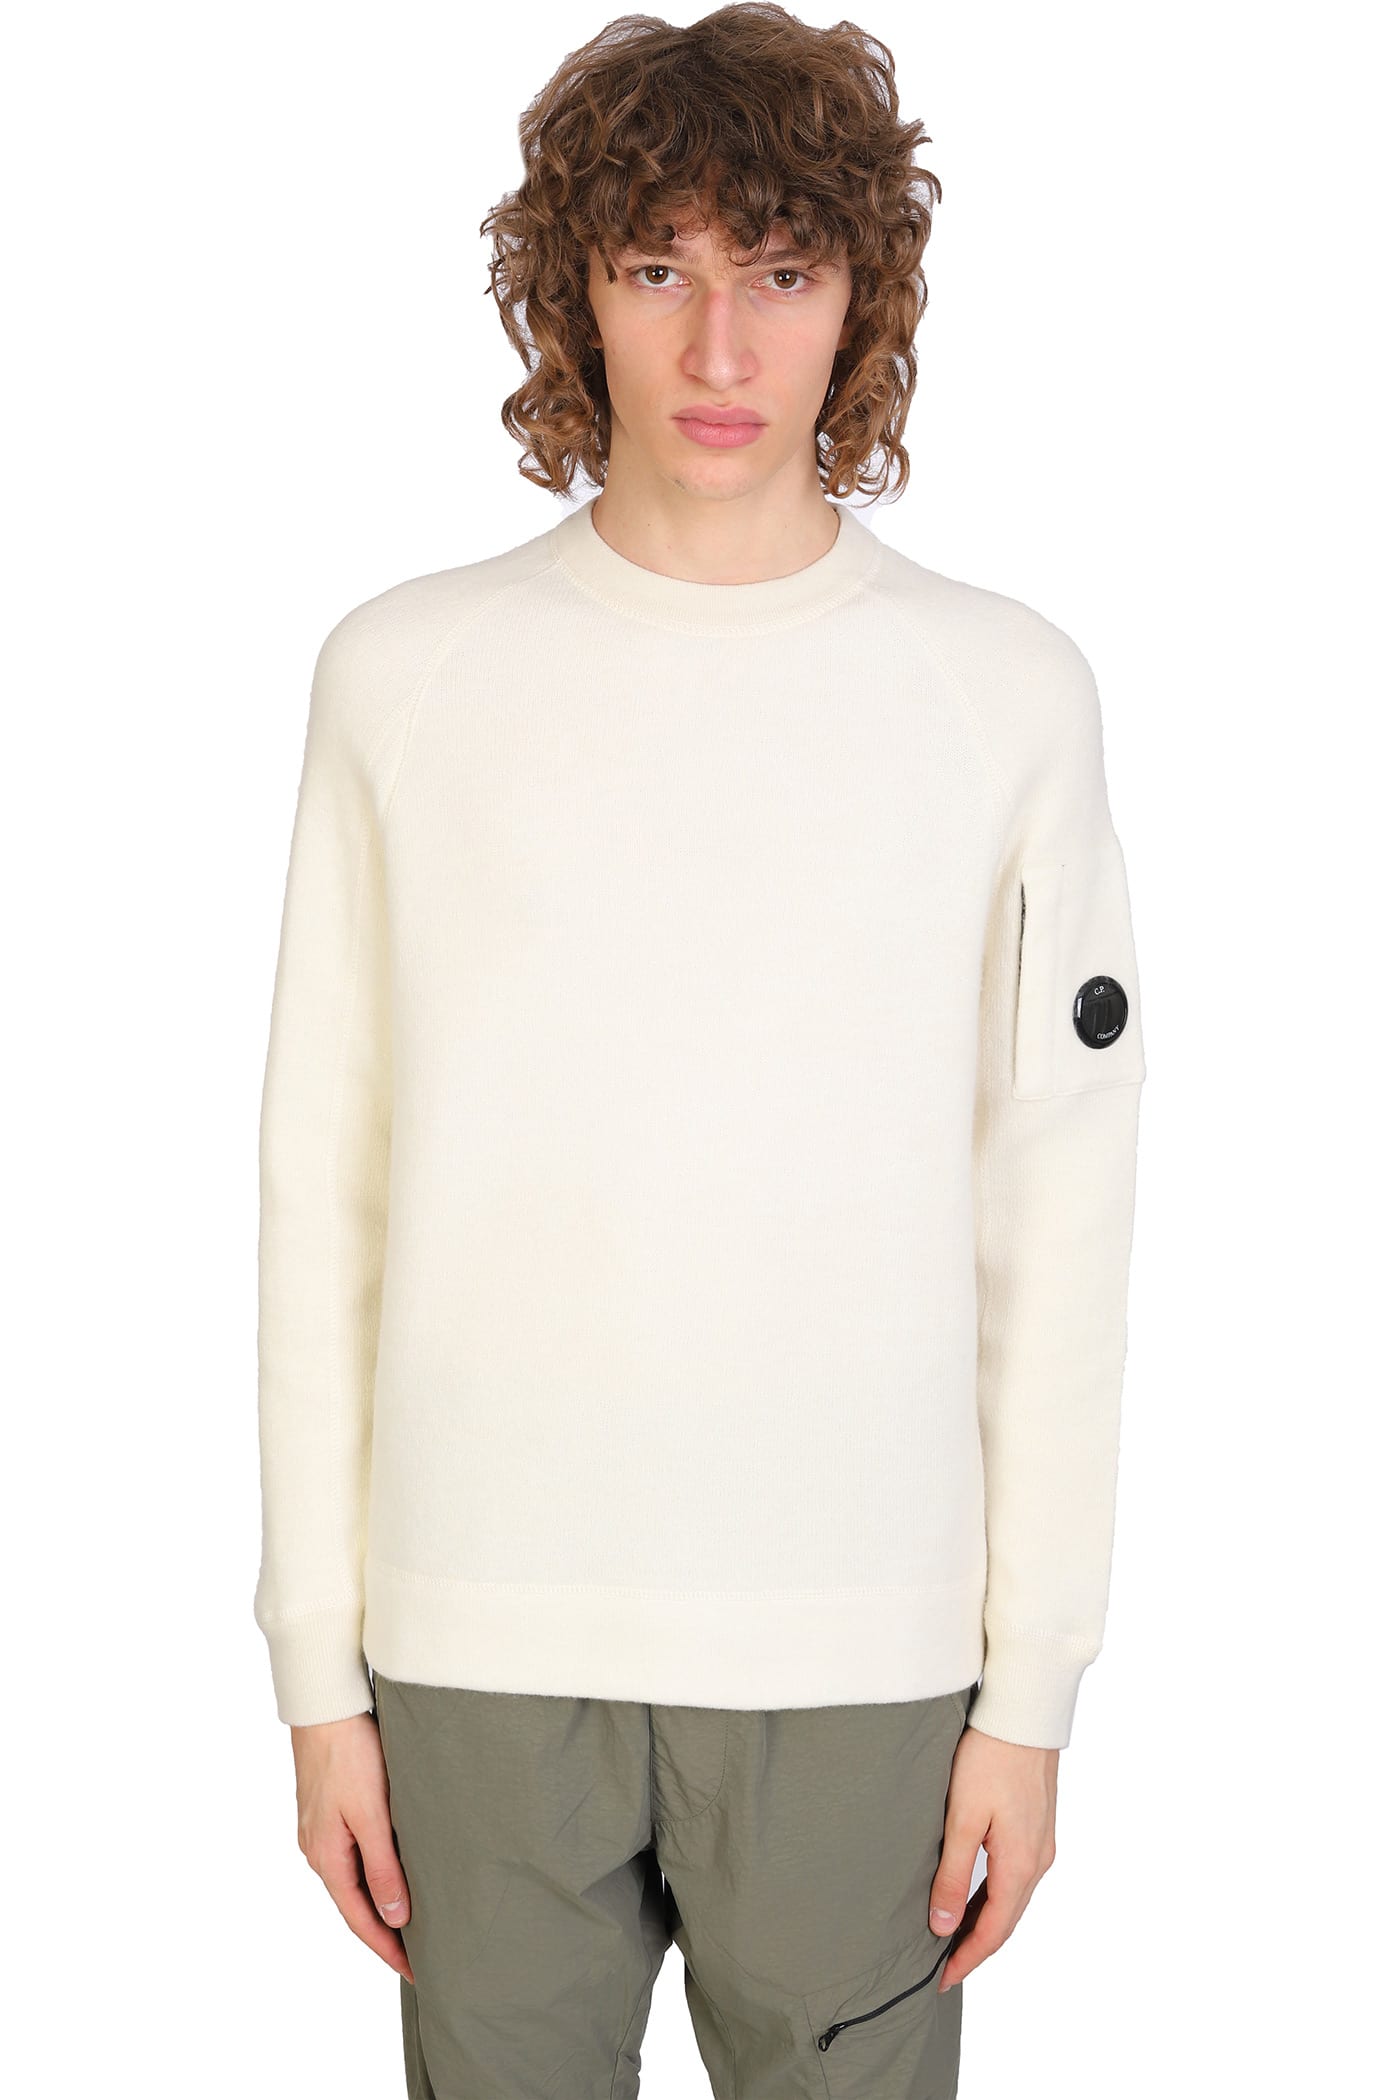 C.P. Company Knitwear In White Synthetic Fibers